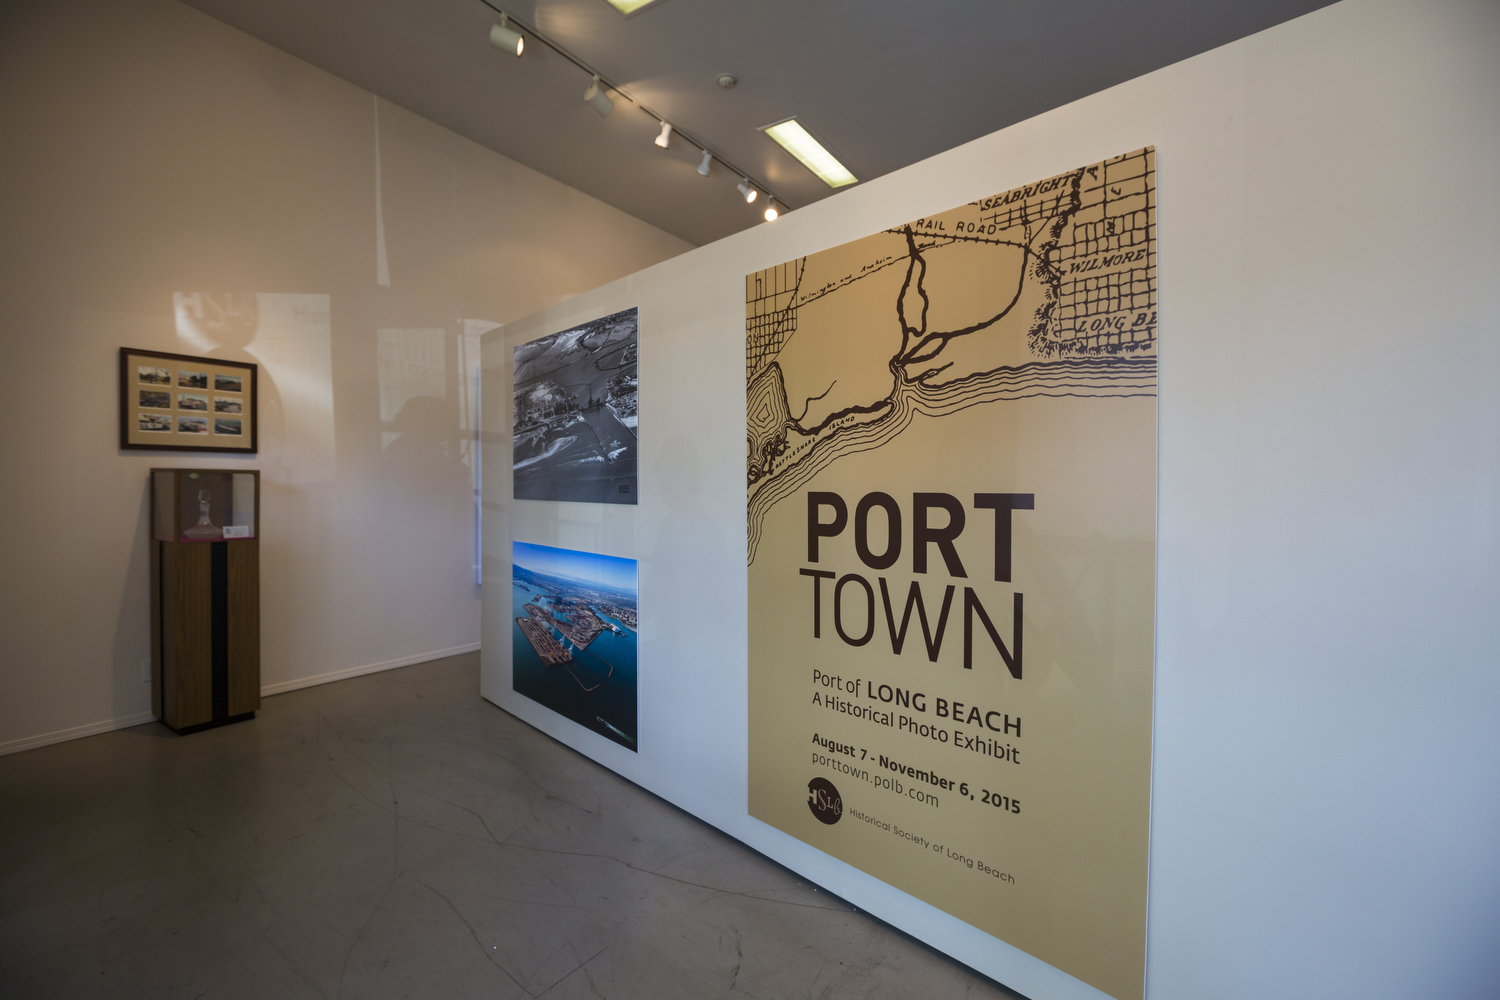 The release of an in-depth book-length history of the Port, Port Town is marked in 2015 with an exhibit at the Historical Society of Long Beach.